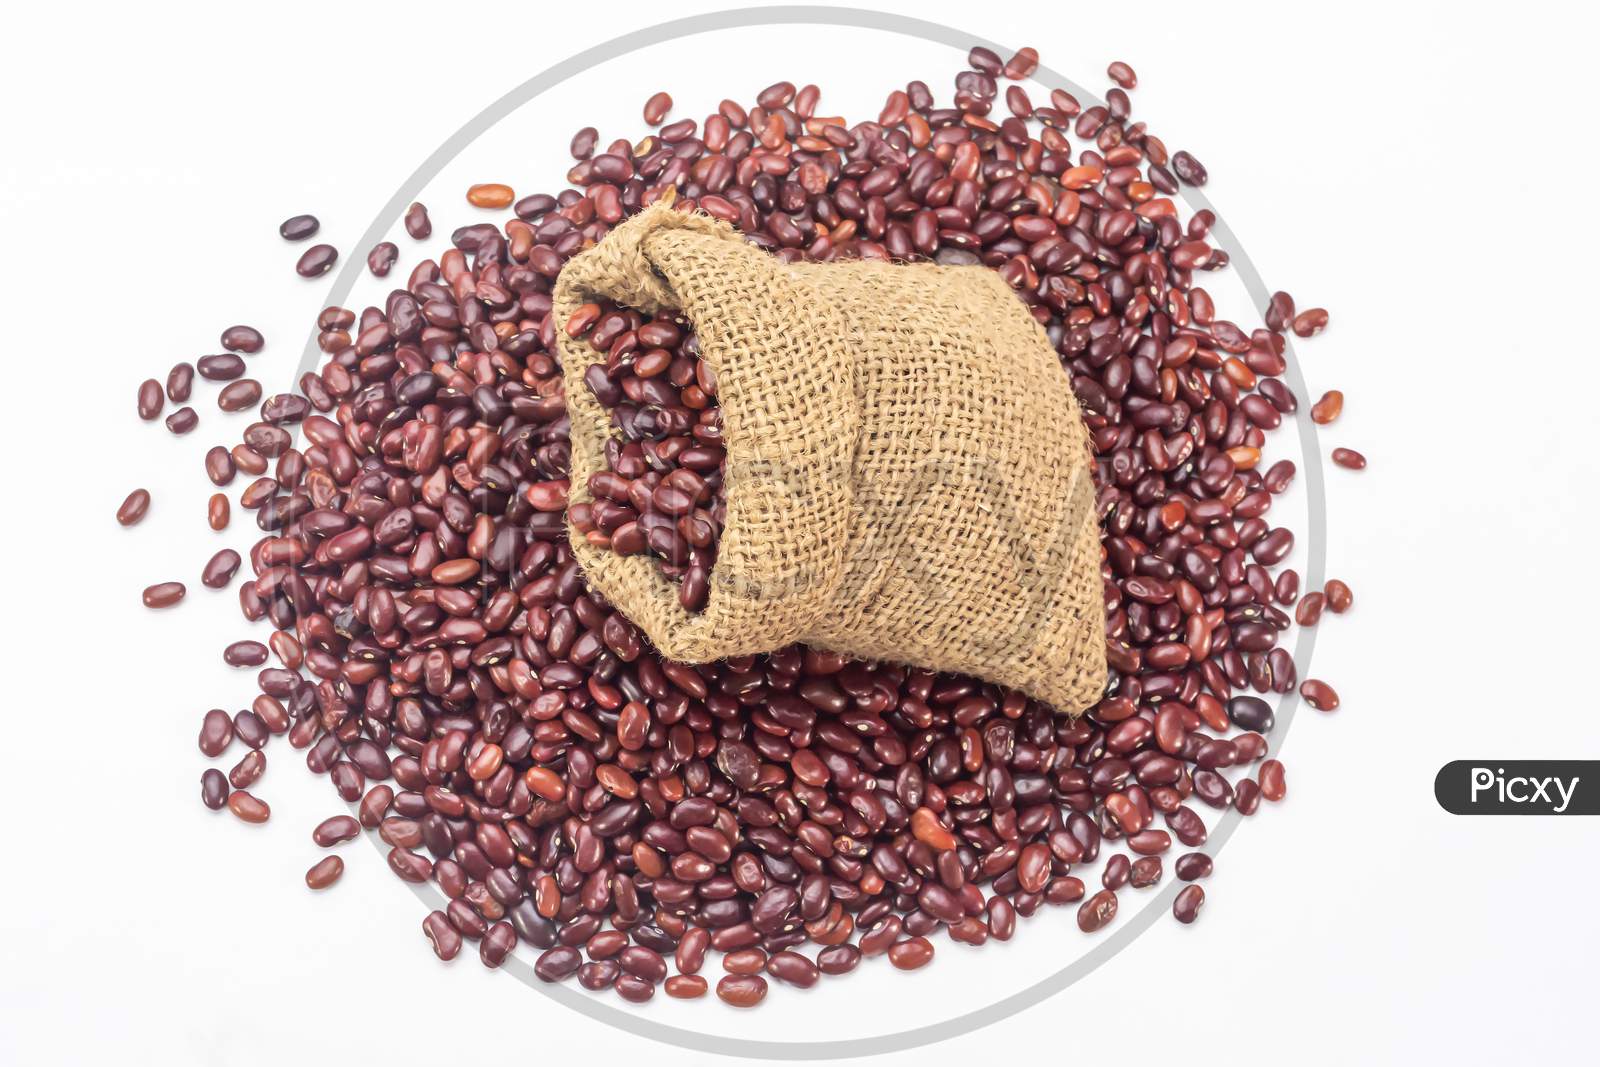 Red kidney beans in a sack bag., Stock image